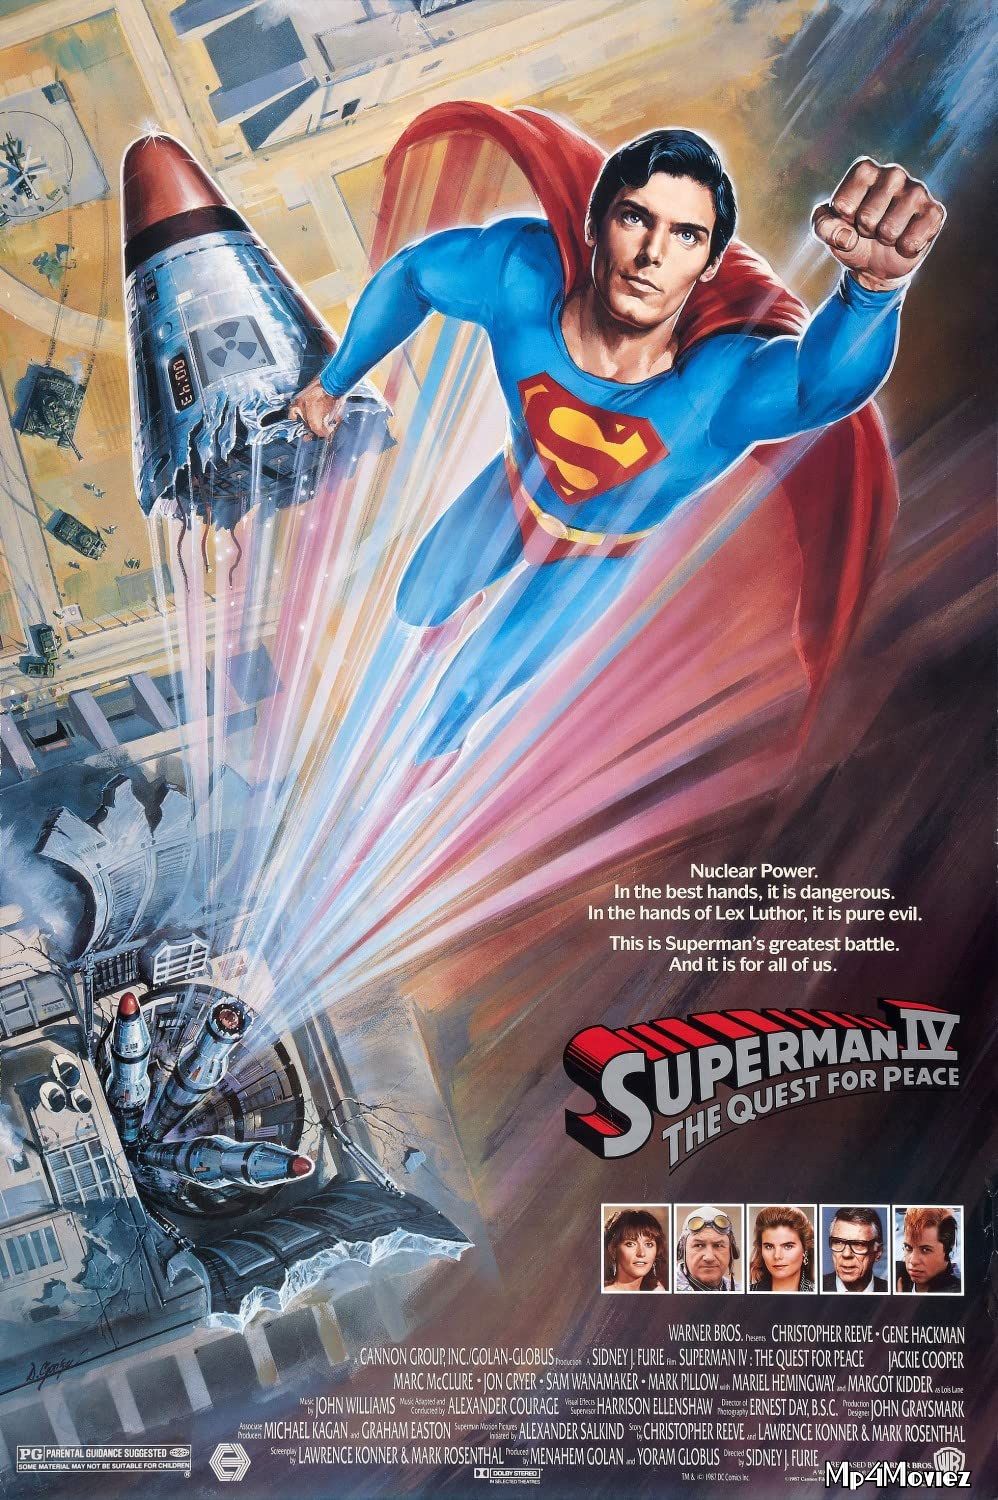 Superman 4 The Quest for Peace (1987) Hindi Dubbed Full Movie download full movie